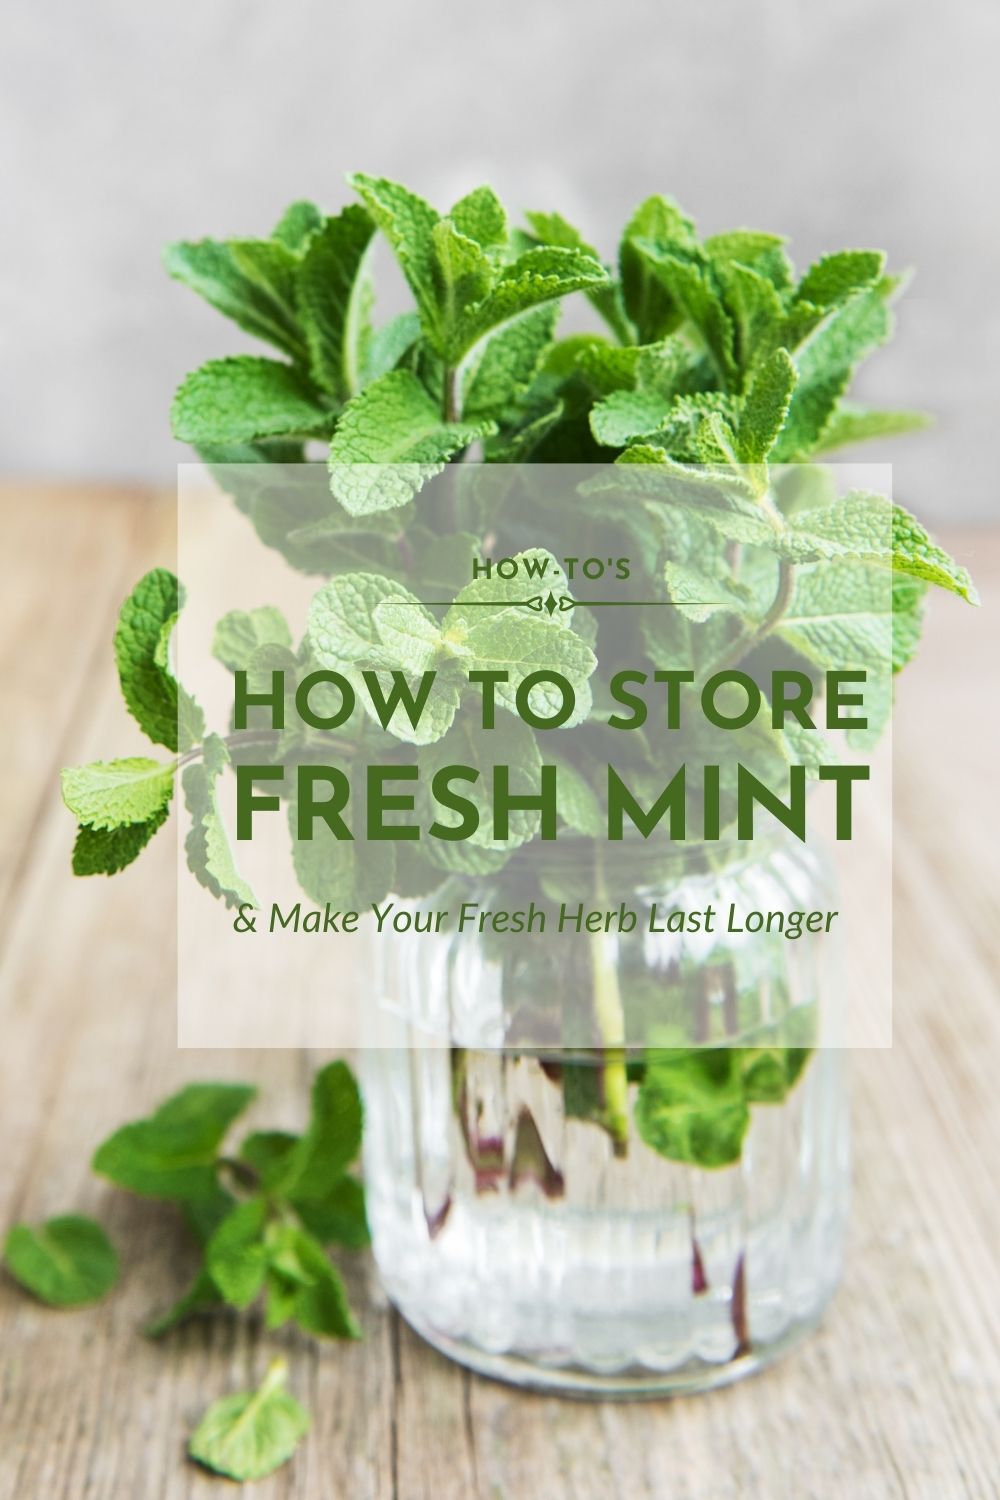 Buy Organic Mint Leaves - Fresh and Delicious